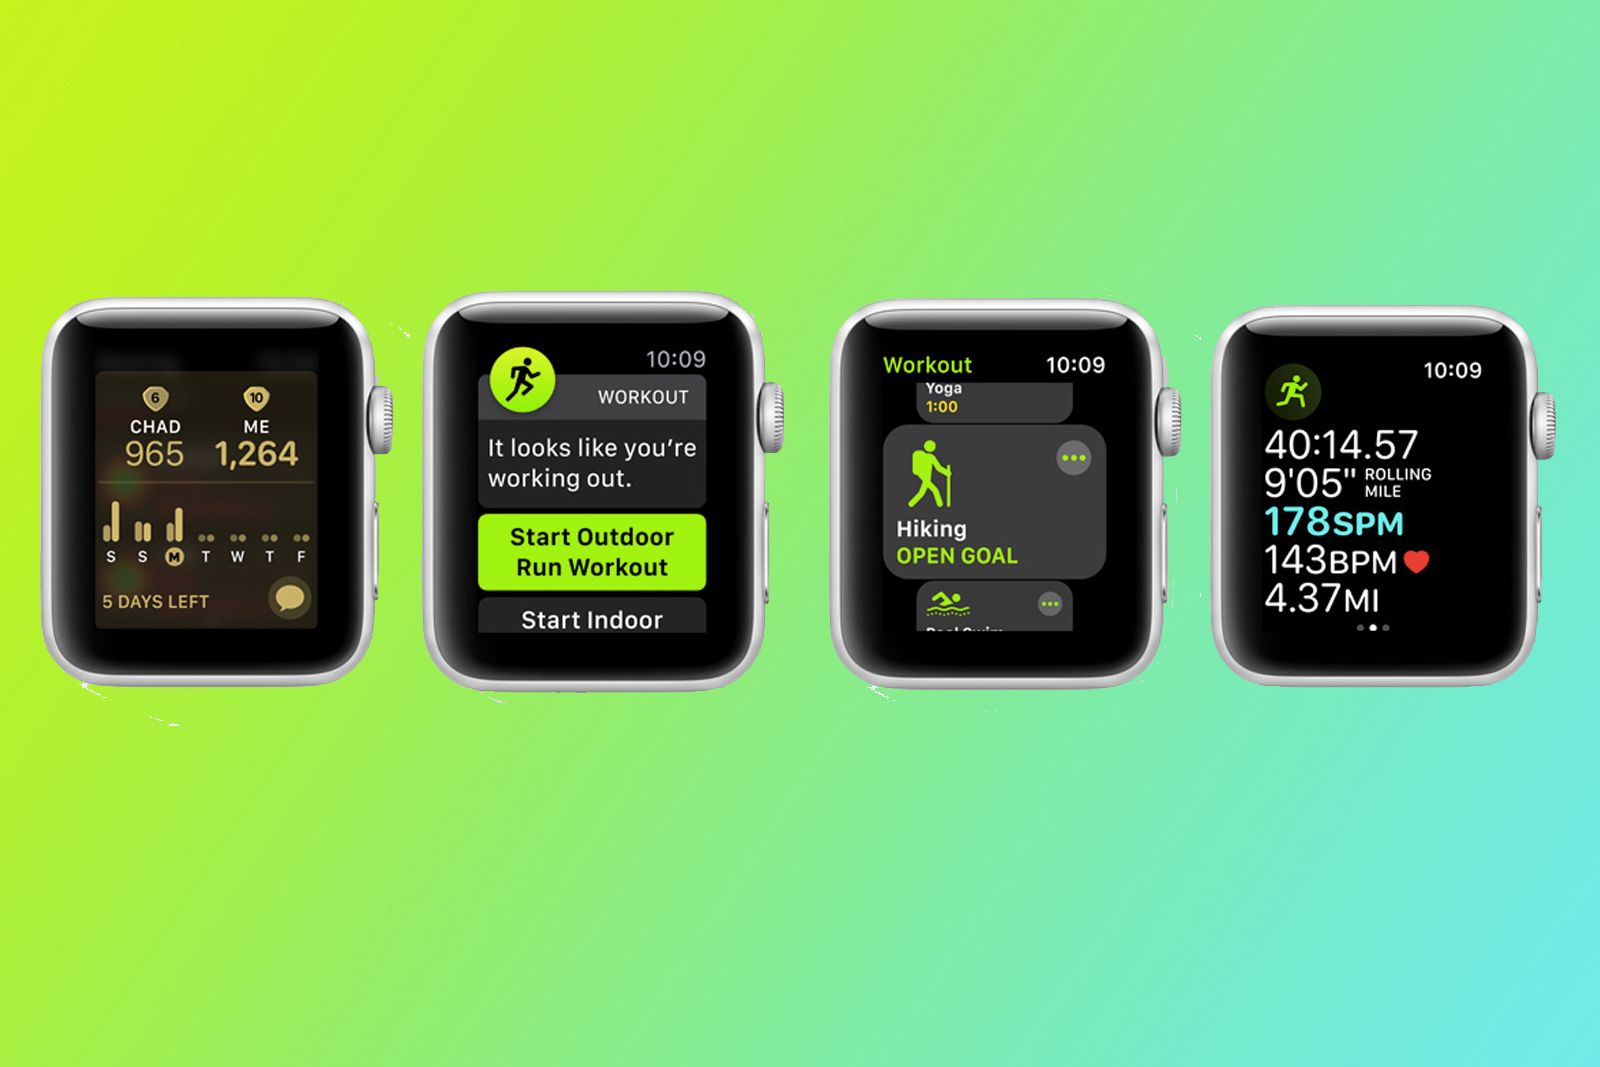 Whats New In Apple Watchos 5 image 5